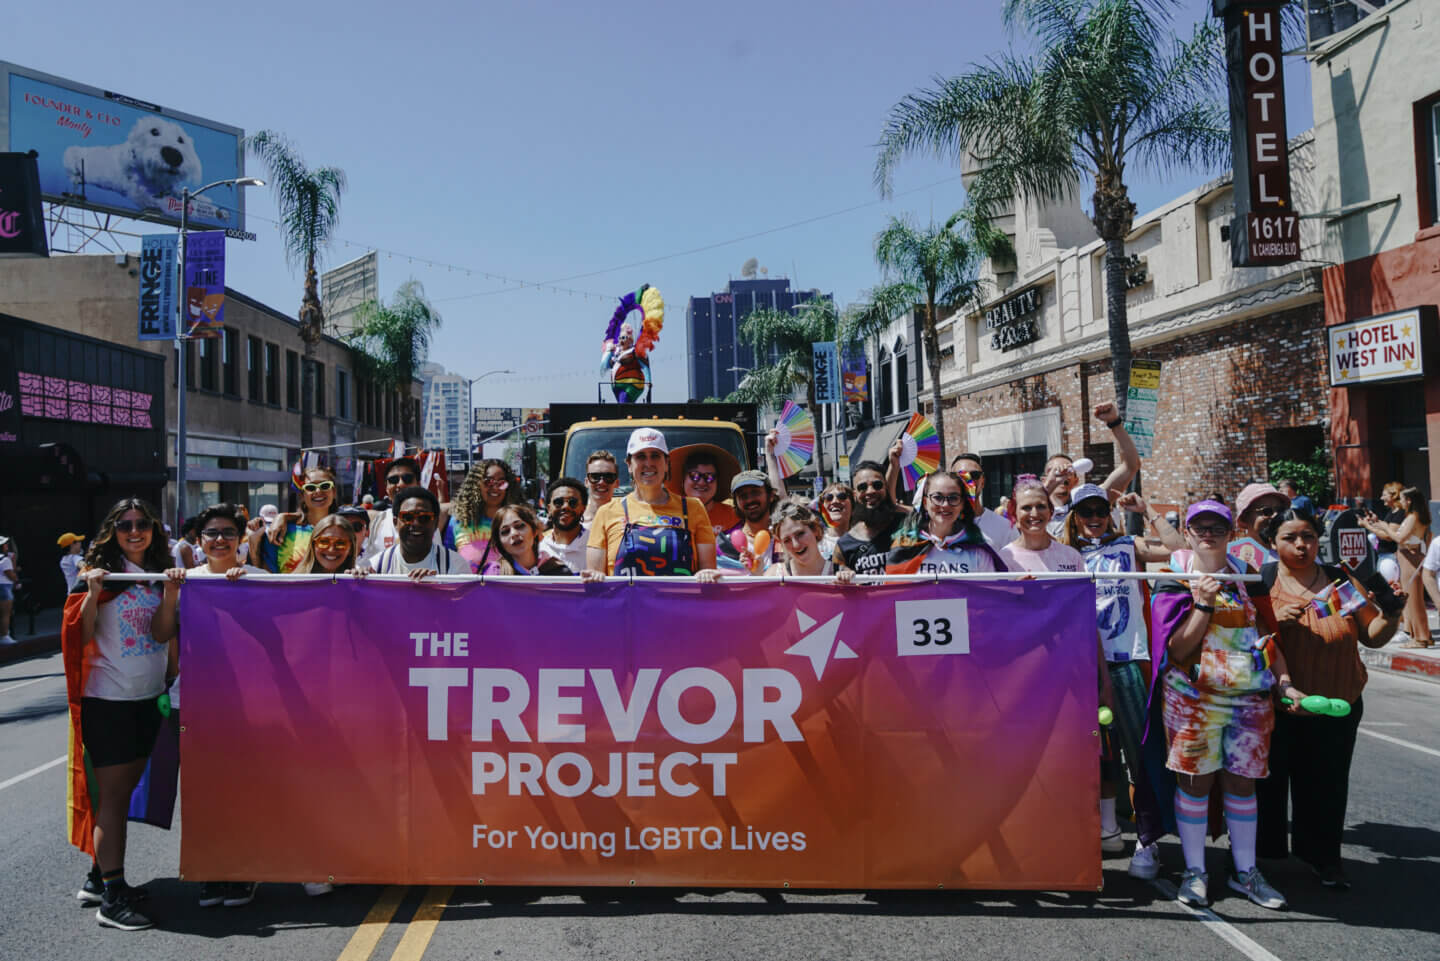 Parade photo of people with a banner that reads "The trevor Project for Young LGBTQ Lives"